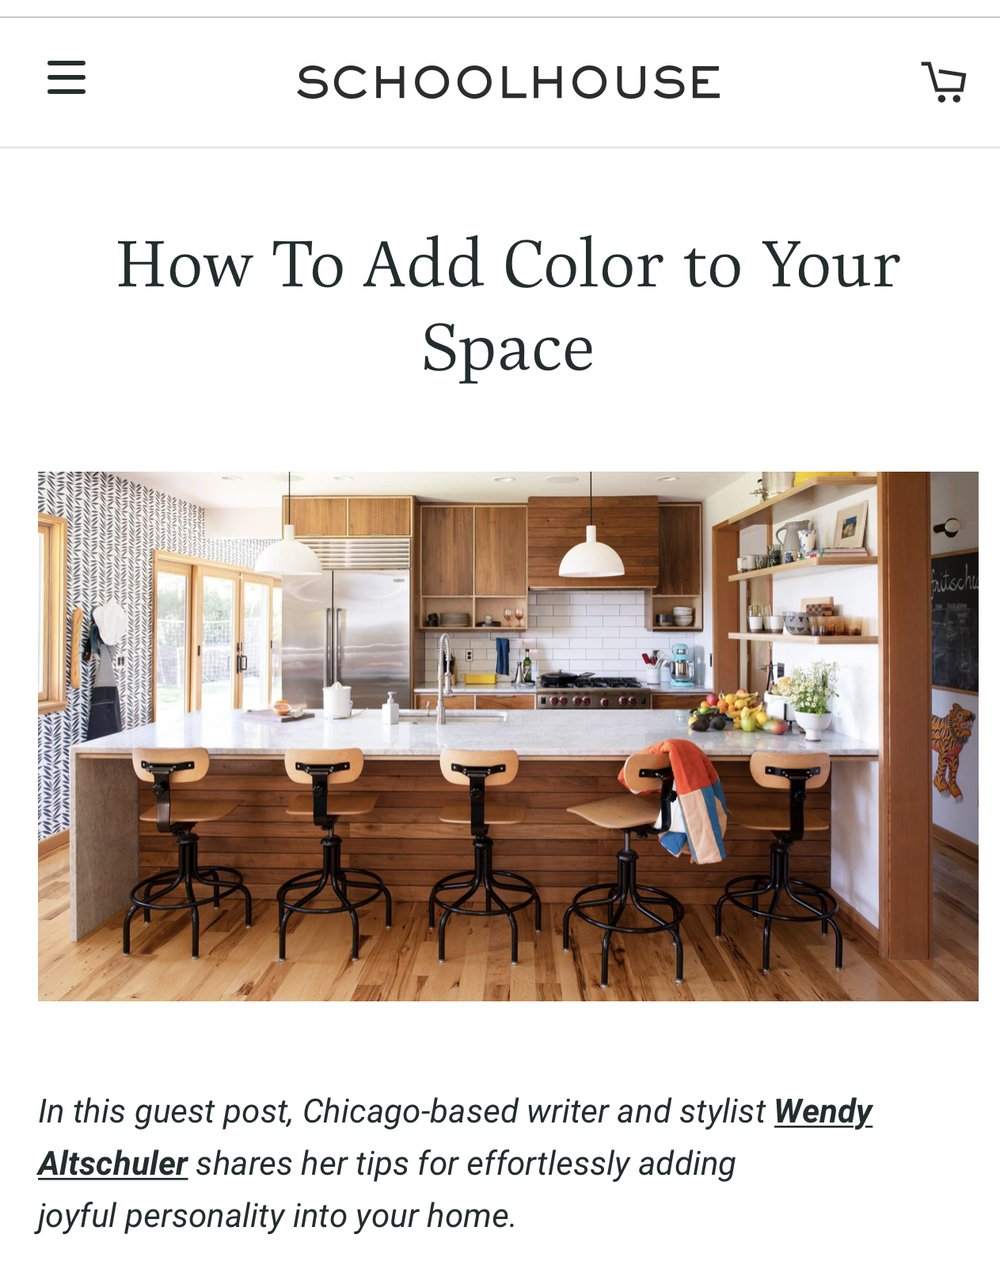 How To Add Color to Your Space